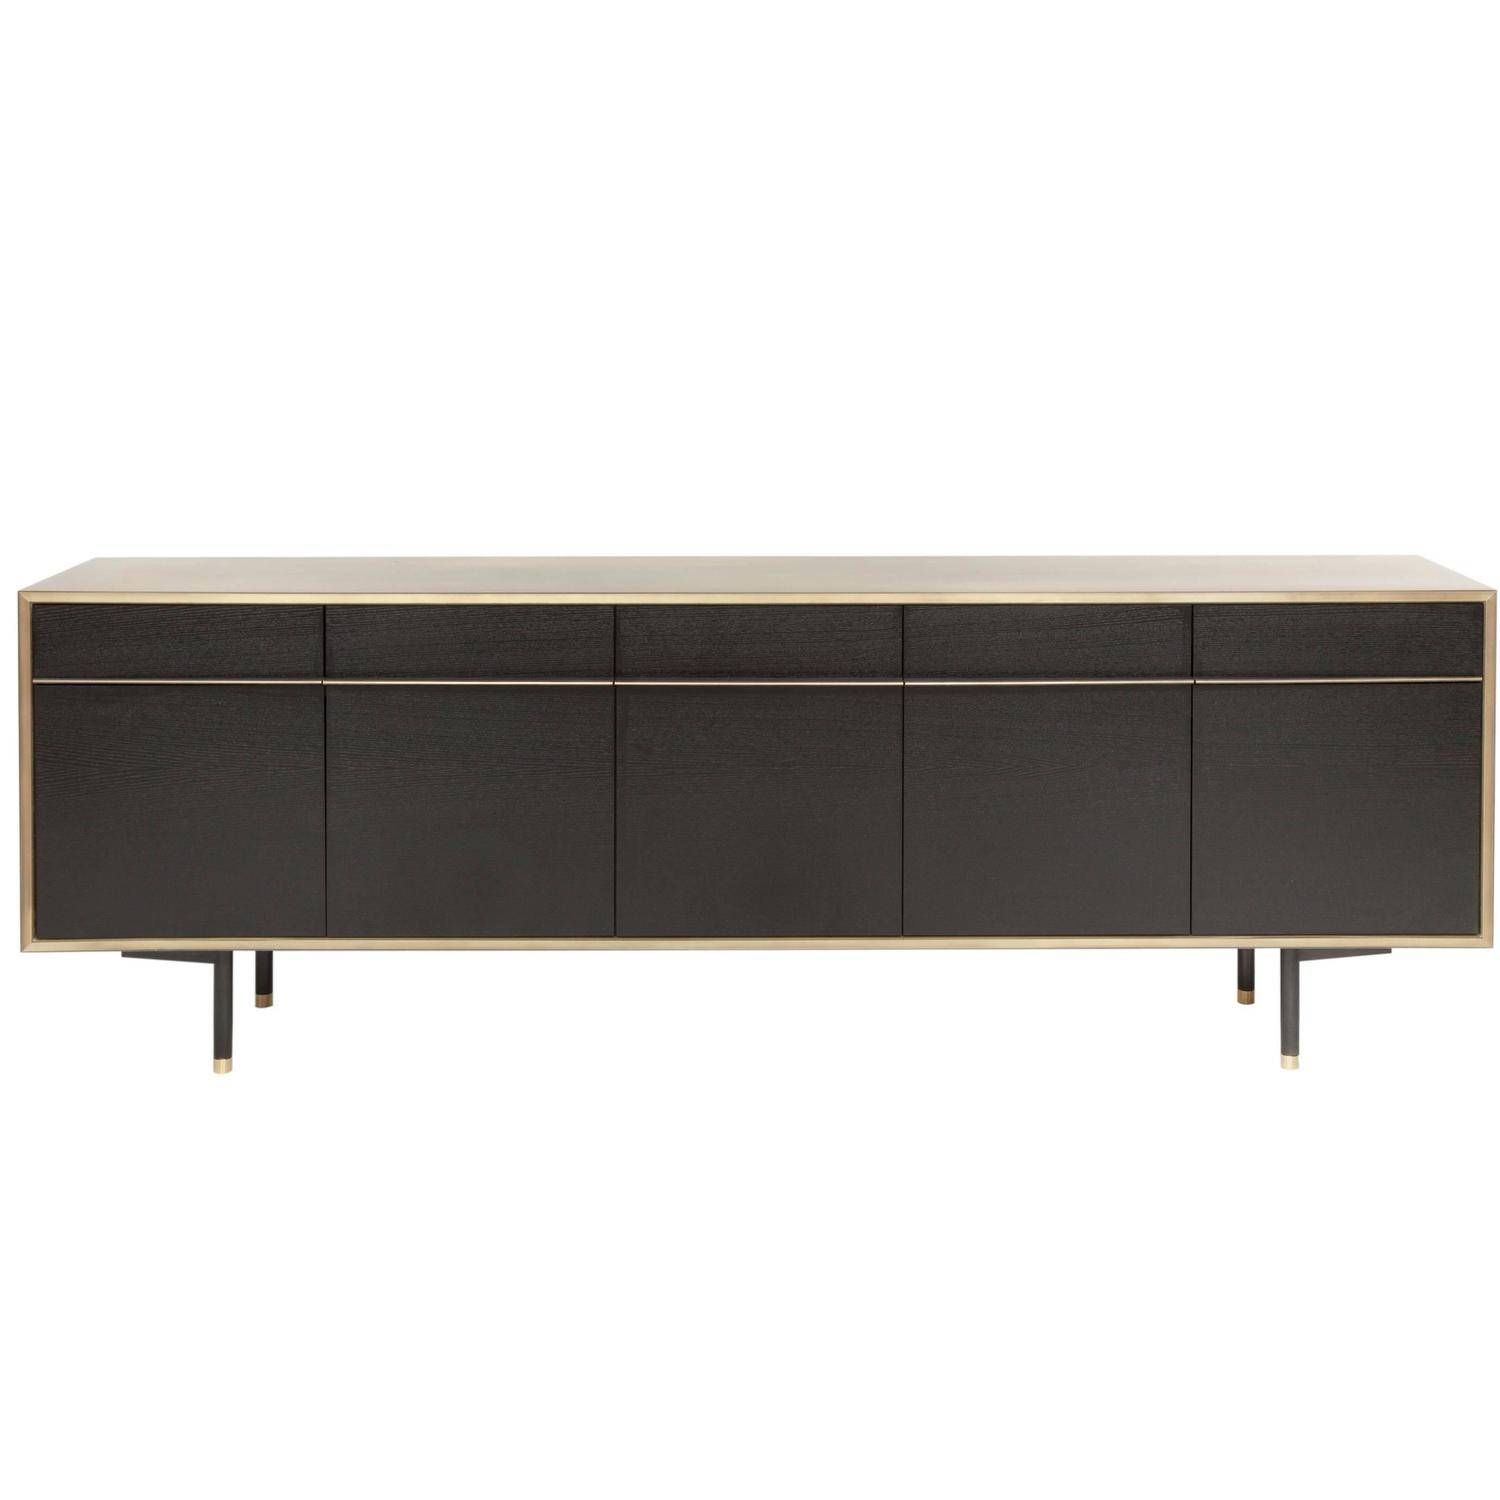 Modern Sideboards – 173 For Sale At 1stdibs For Modern Sideboards (View 26 of 30)